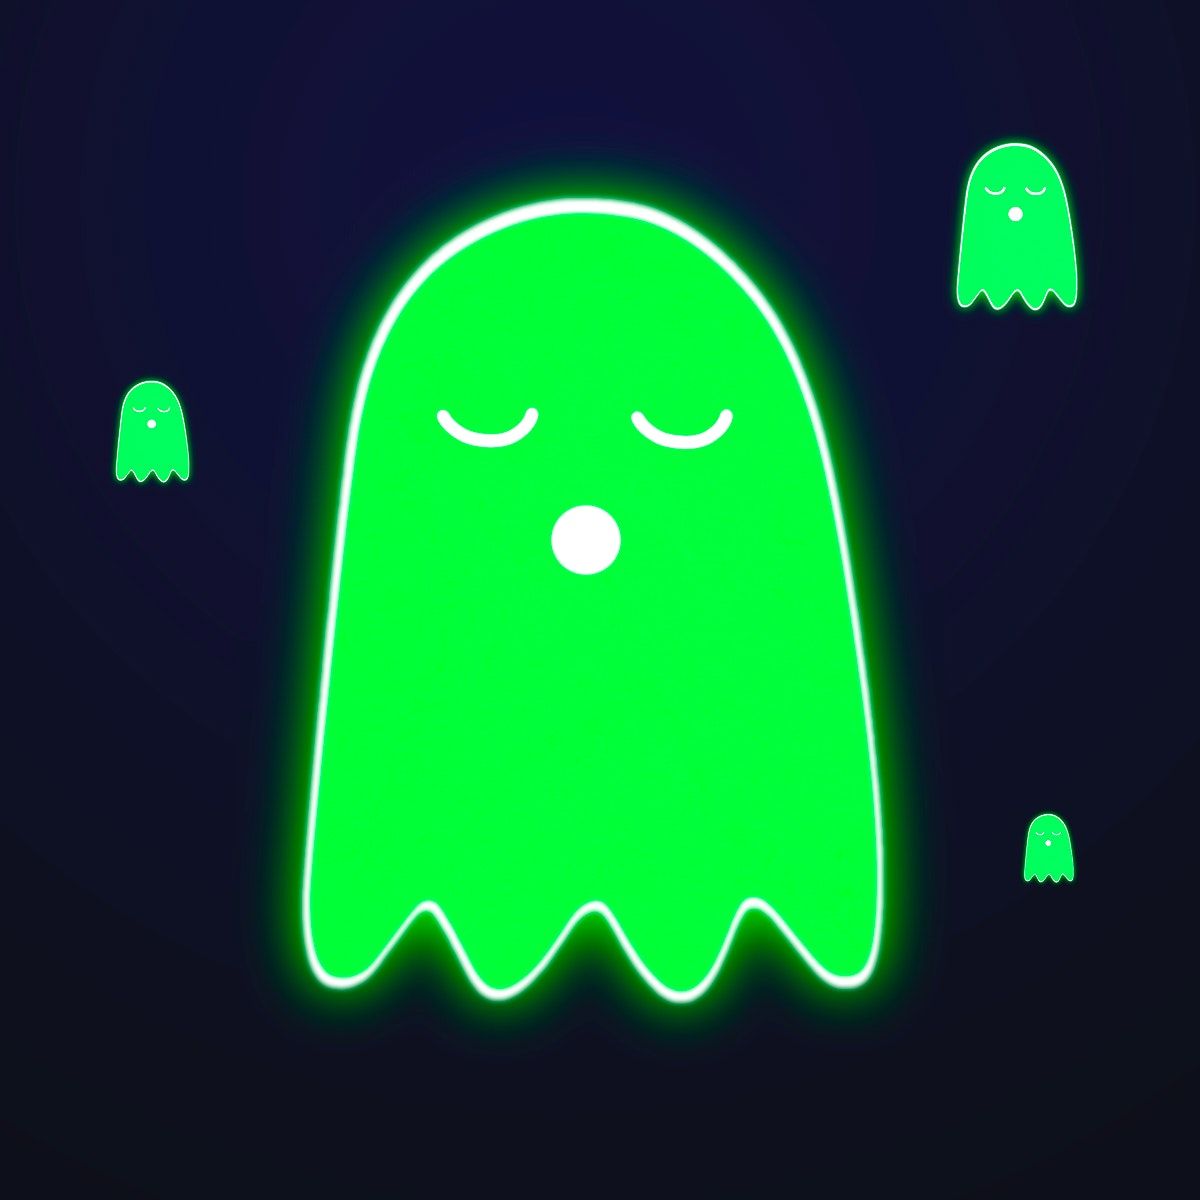 Download free psd / image of Neon green Halloween ghost sticker overlay design resource about halloween, halloween sticker, horror, neon green stickers, and ghost 2408306